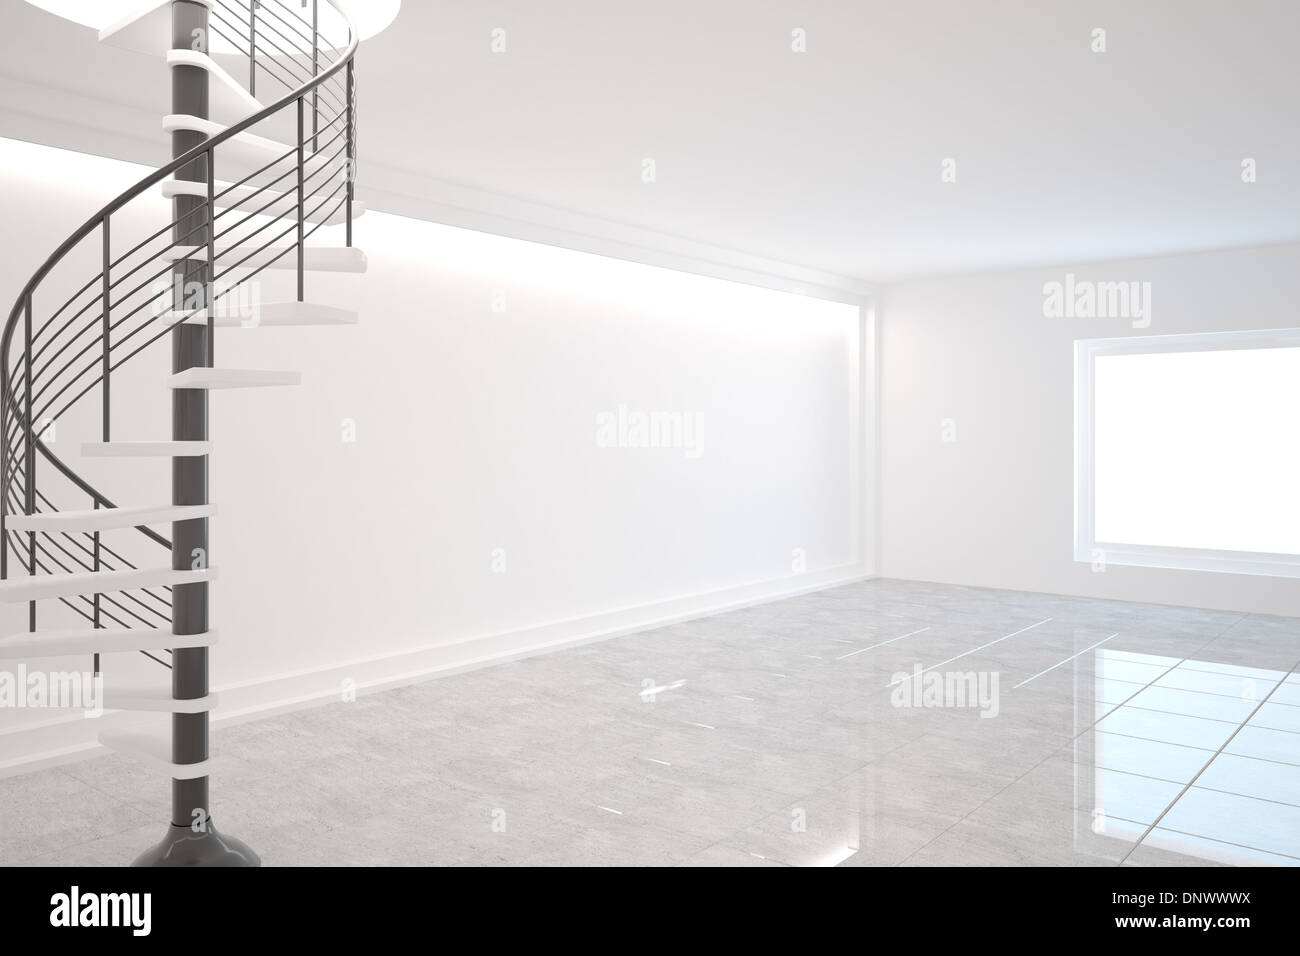 Digitally generated room with winding stairs Stock Photo